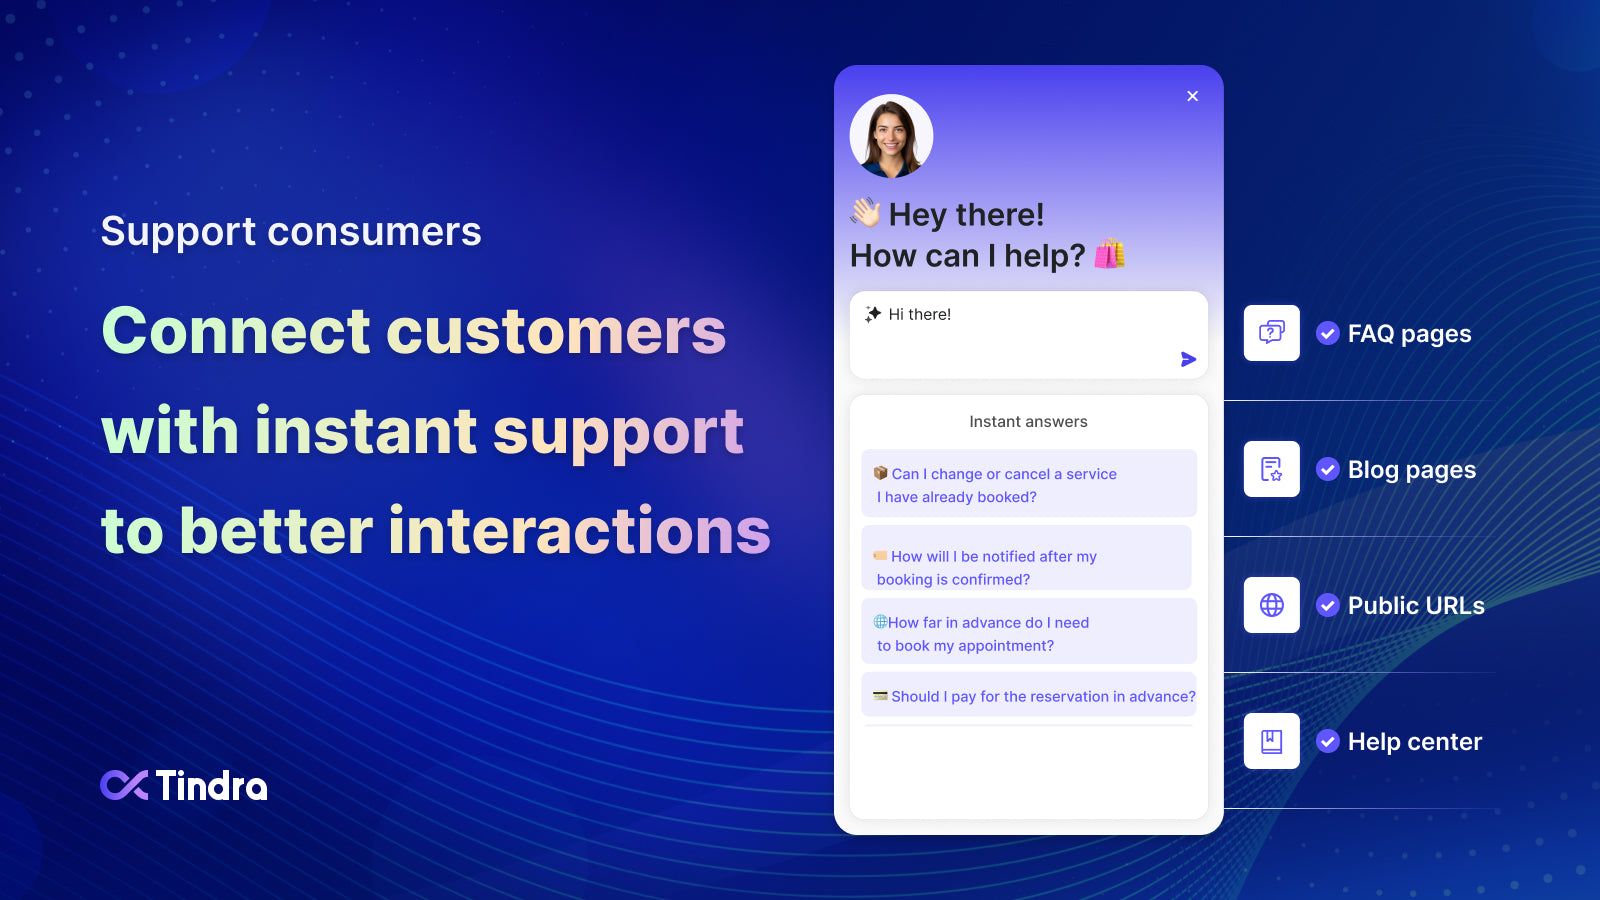 Connect customers with instant support to better interactions.